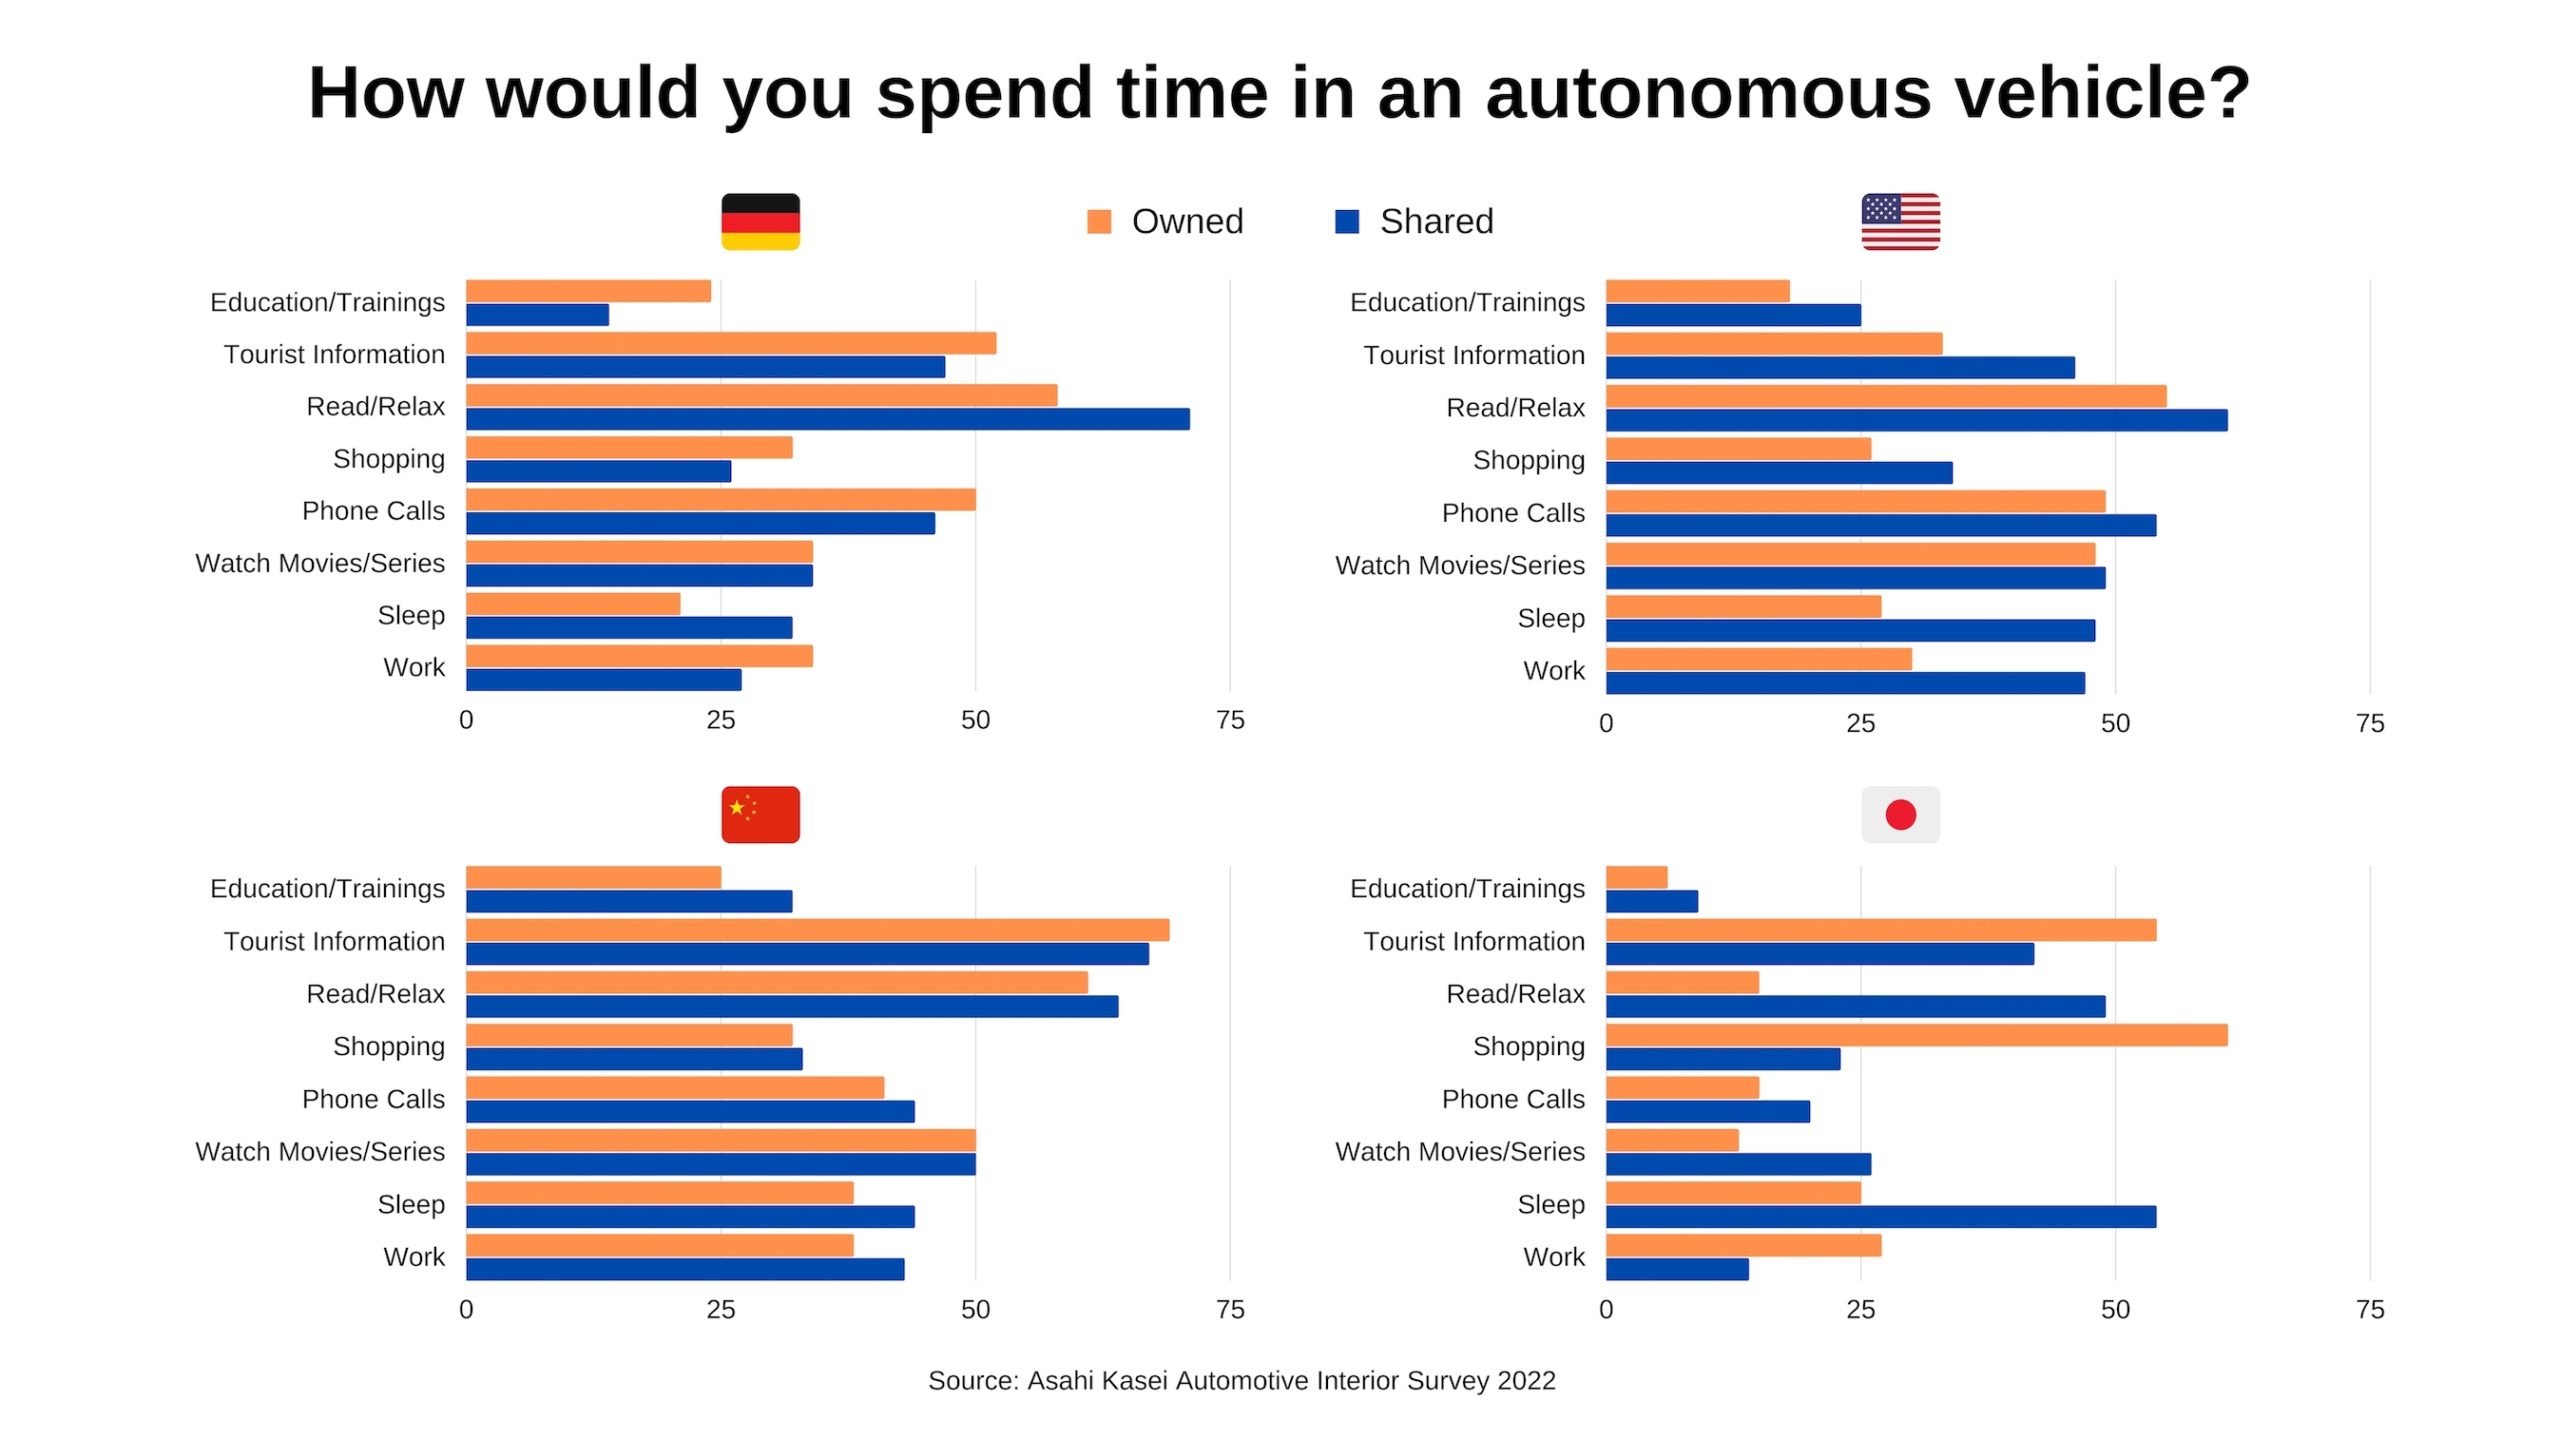 How would you spend time in an autonomous vehicle